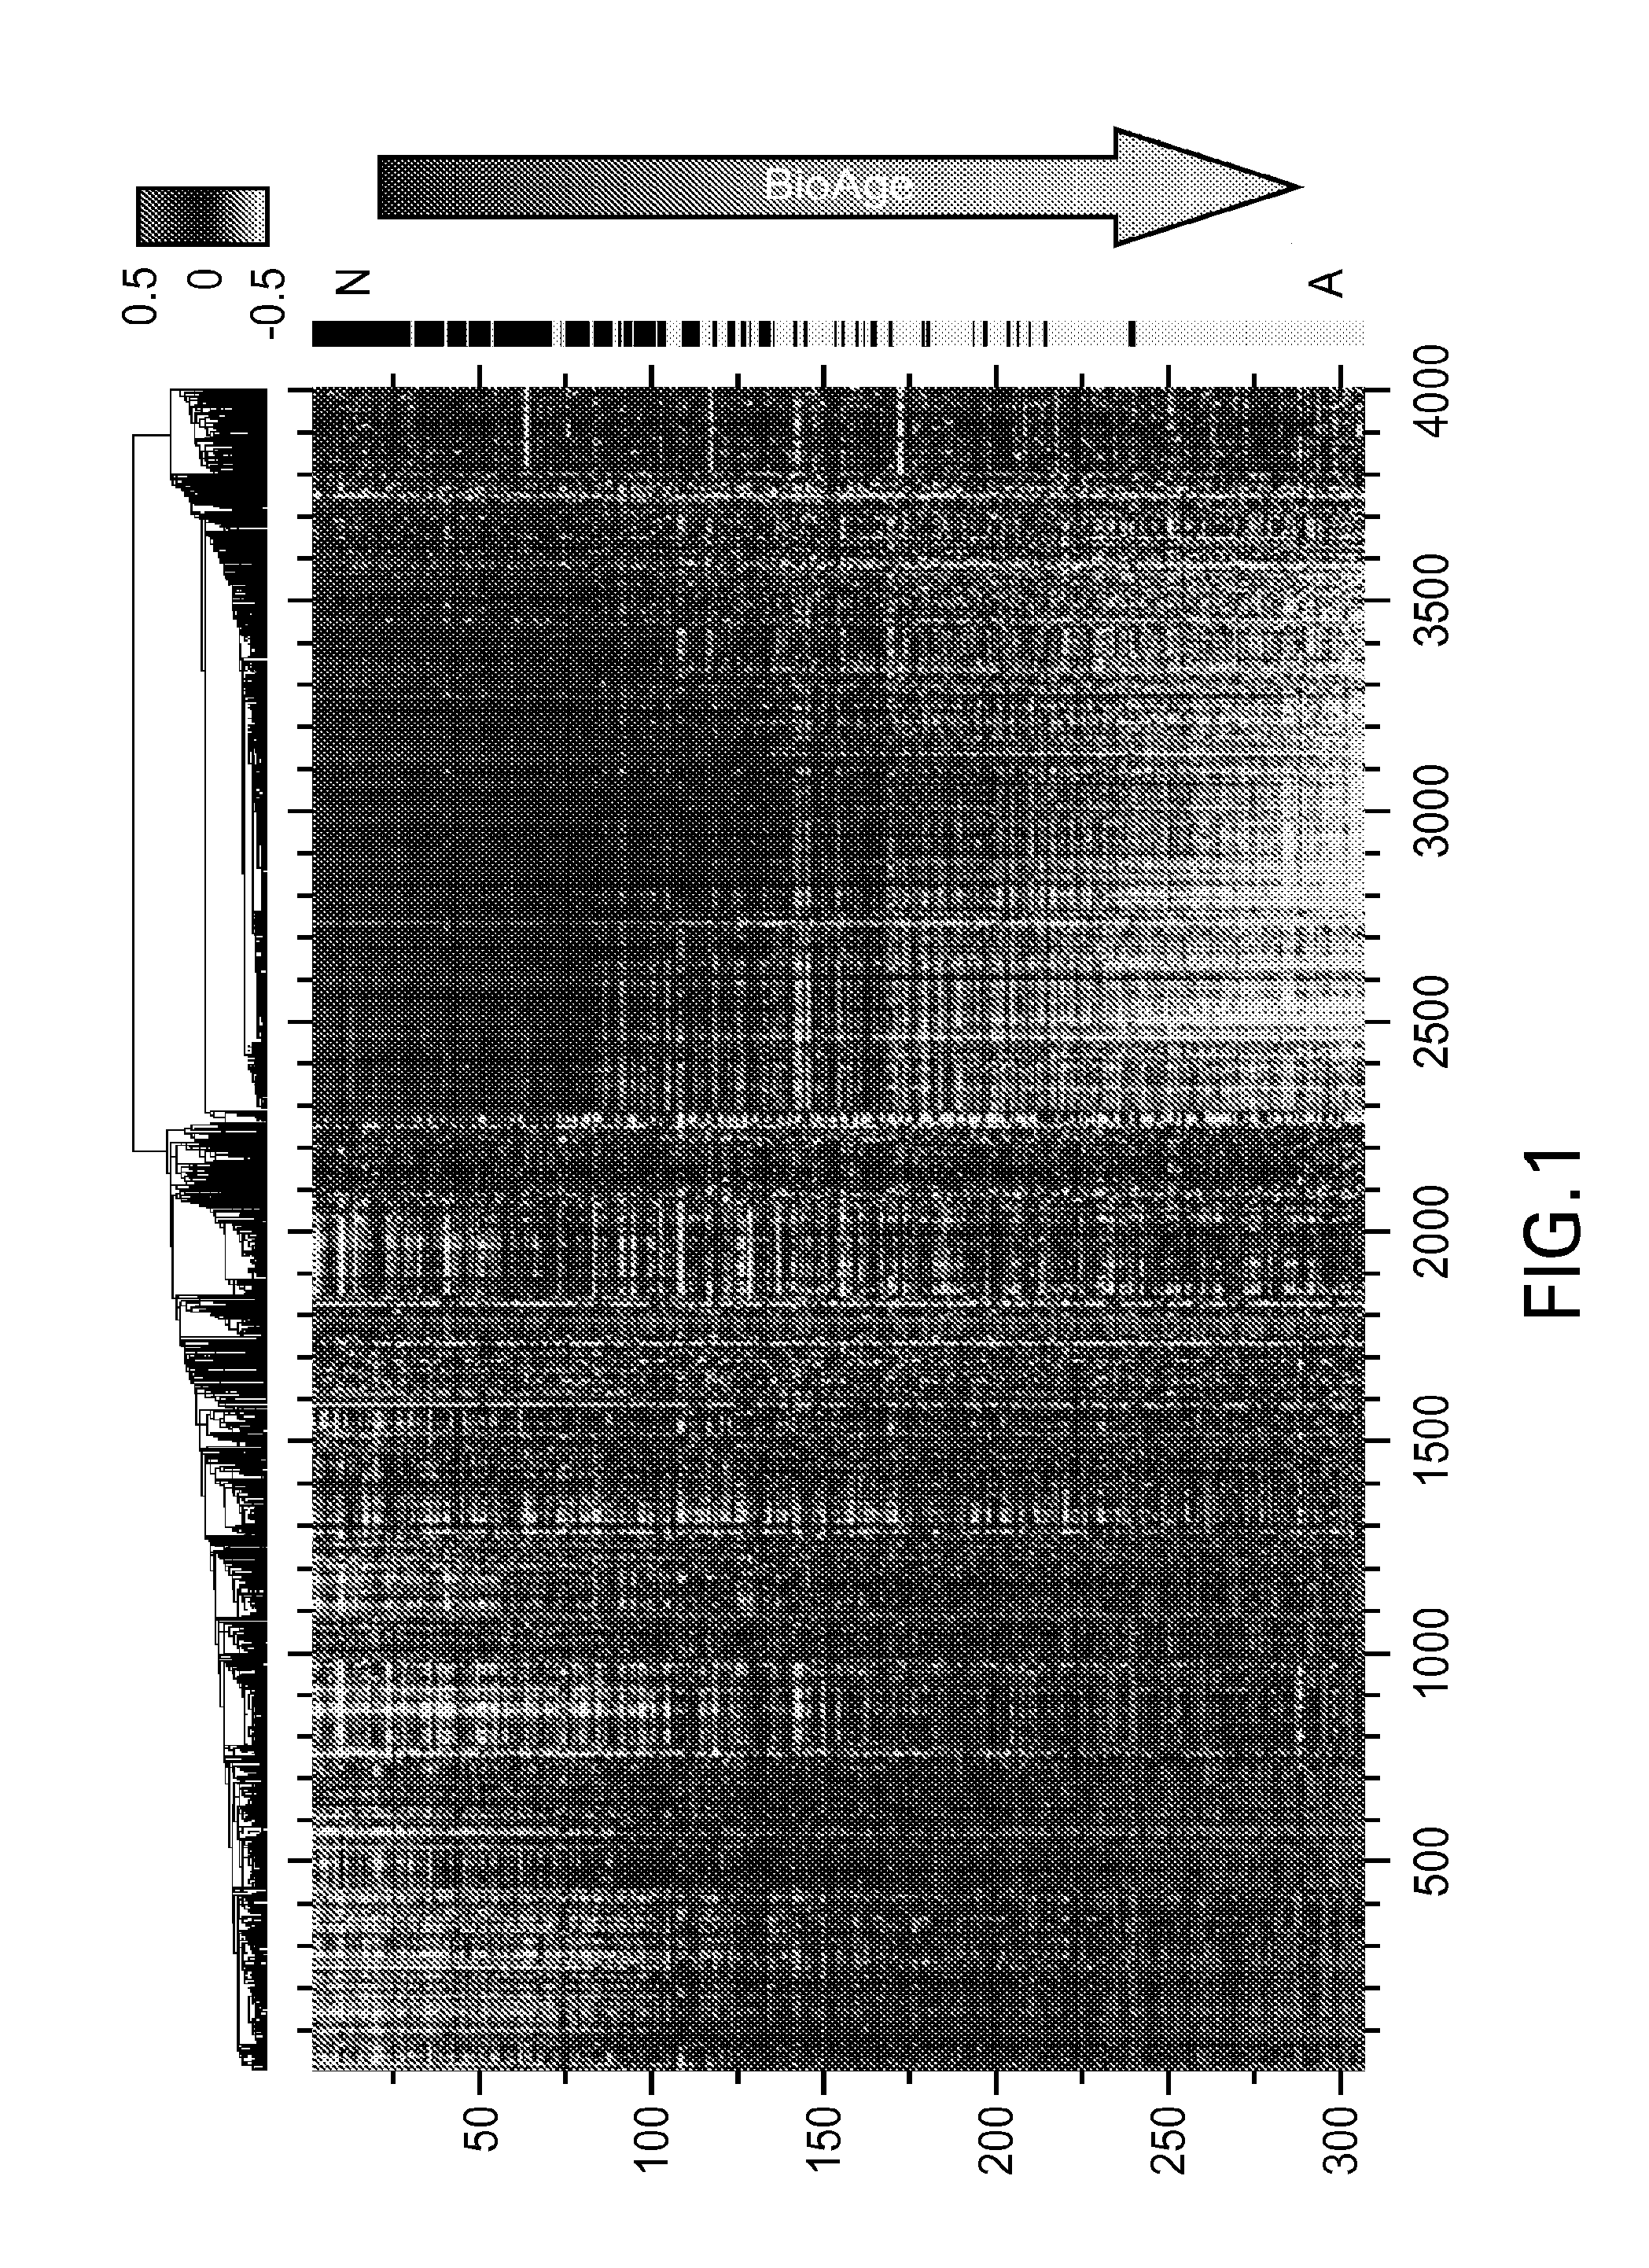 Alzheimer's disease signature markers and methods of use